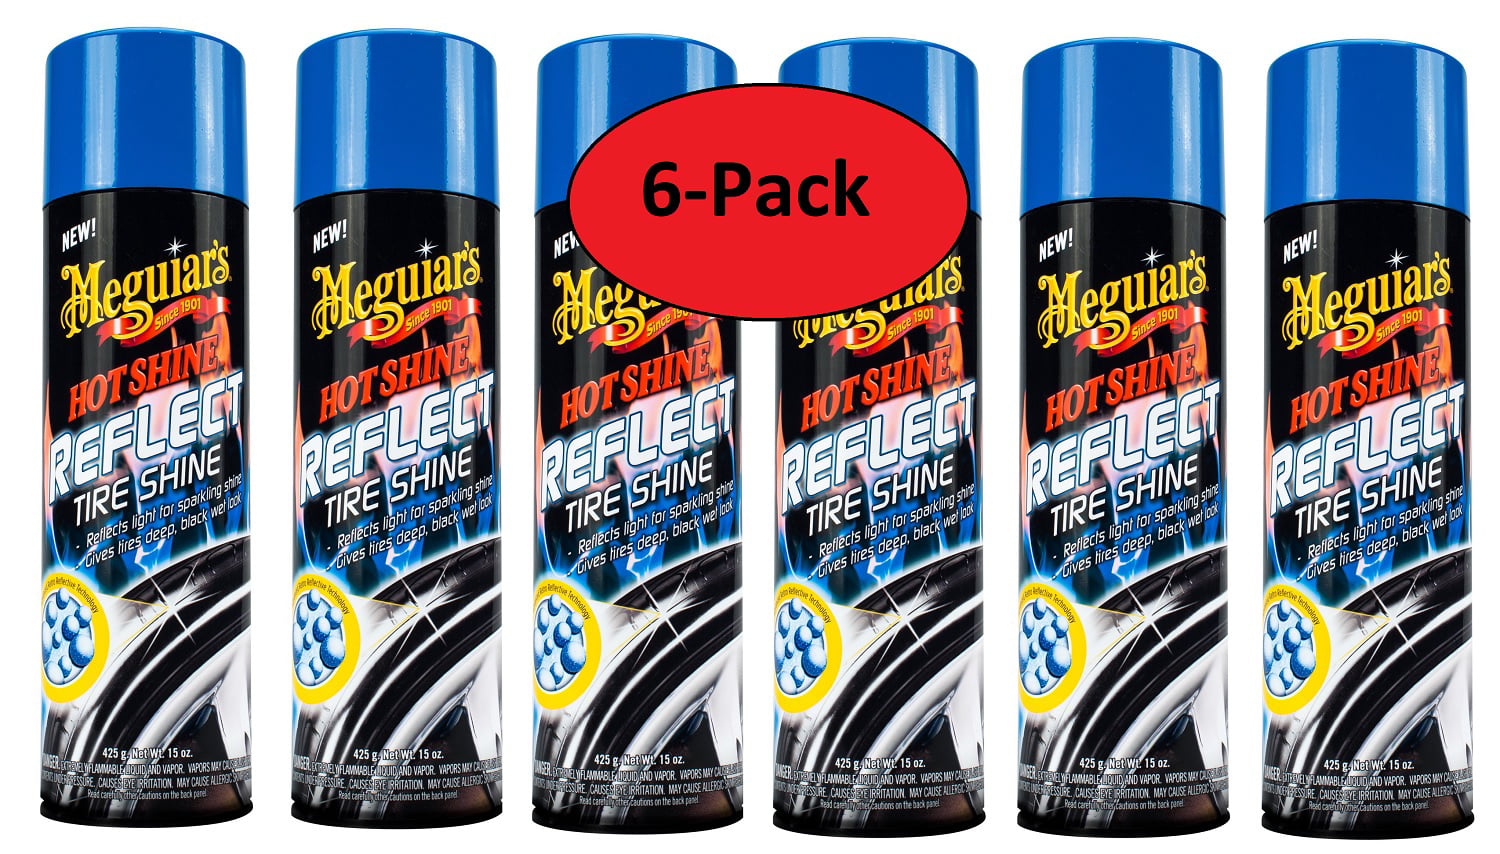 Meguiars Hot Shine Reflect Tire Shine Review and Test Results 